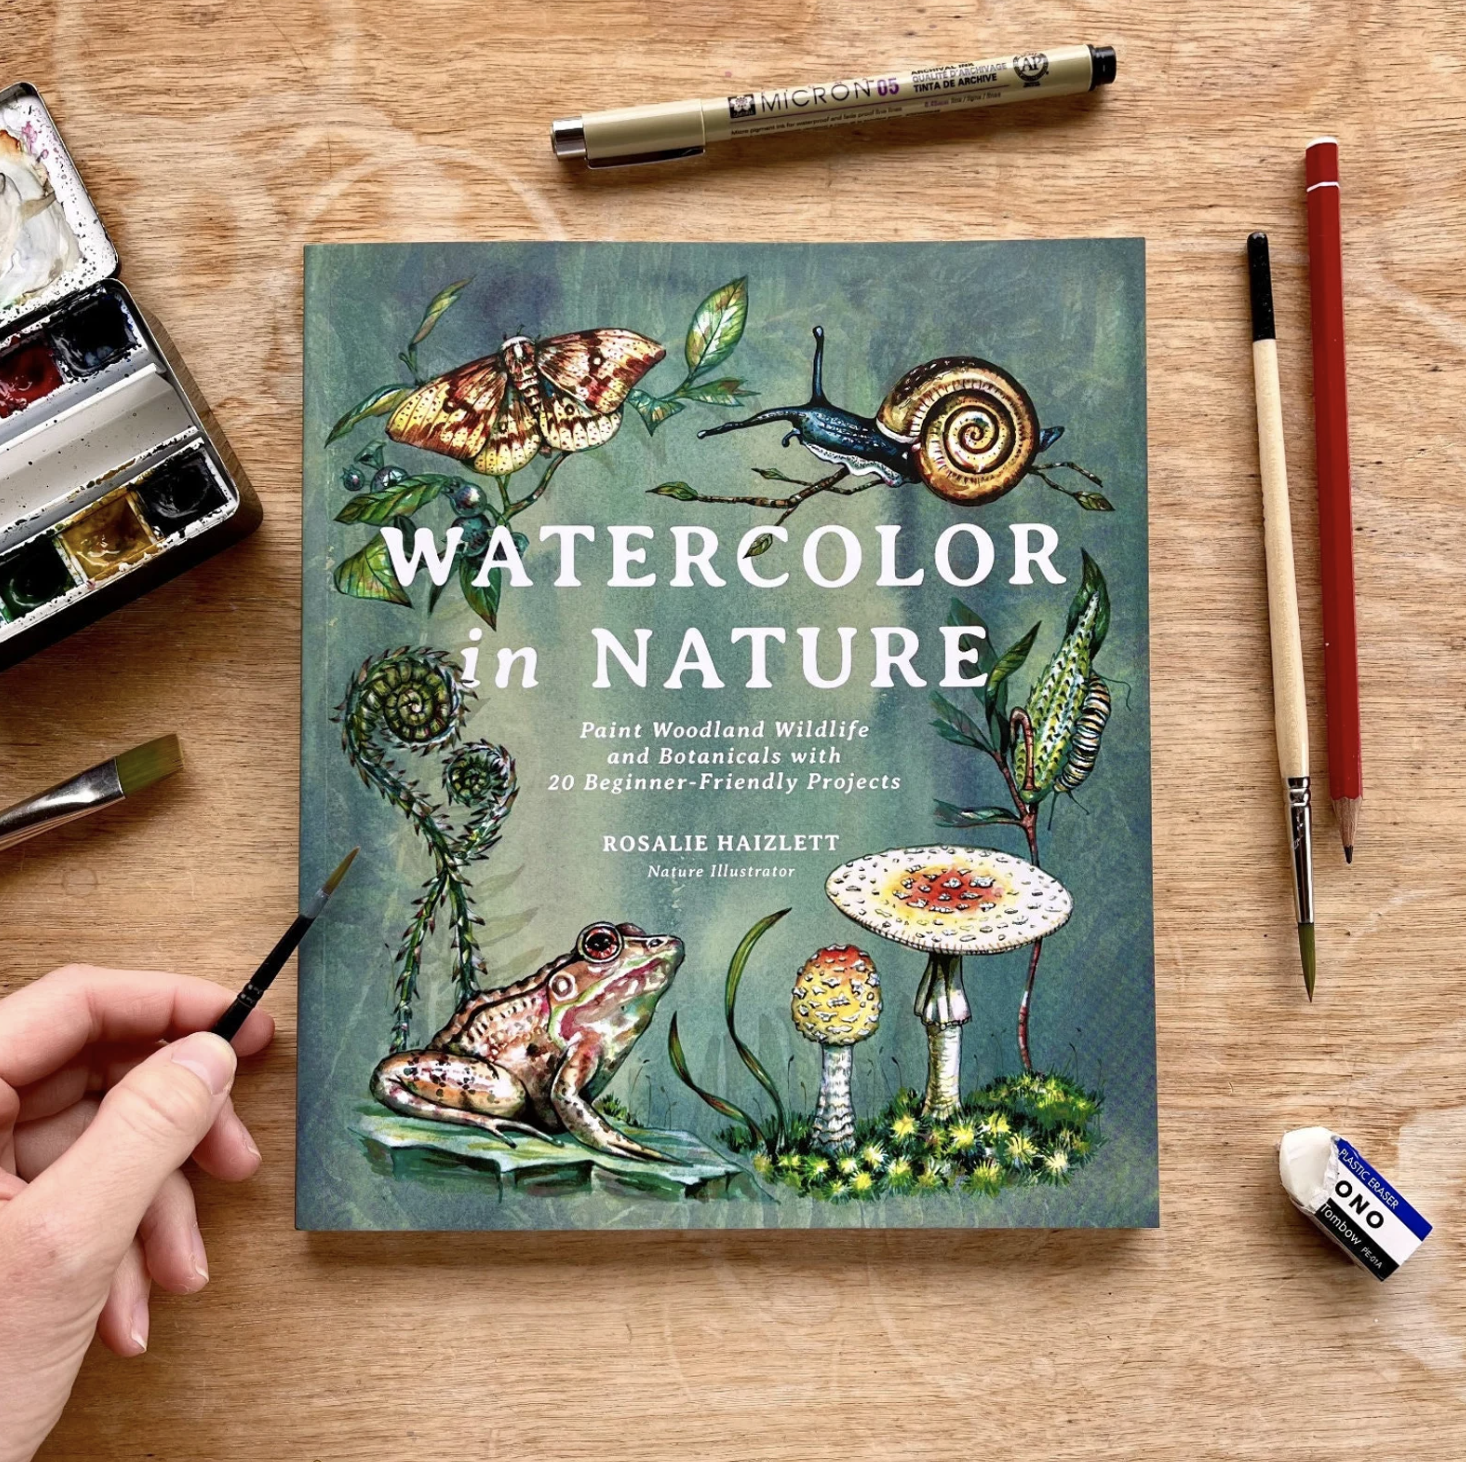 The Watercolor Painting Book [Book]